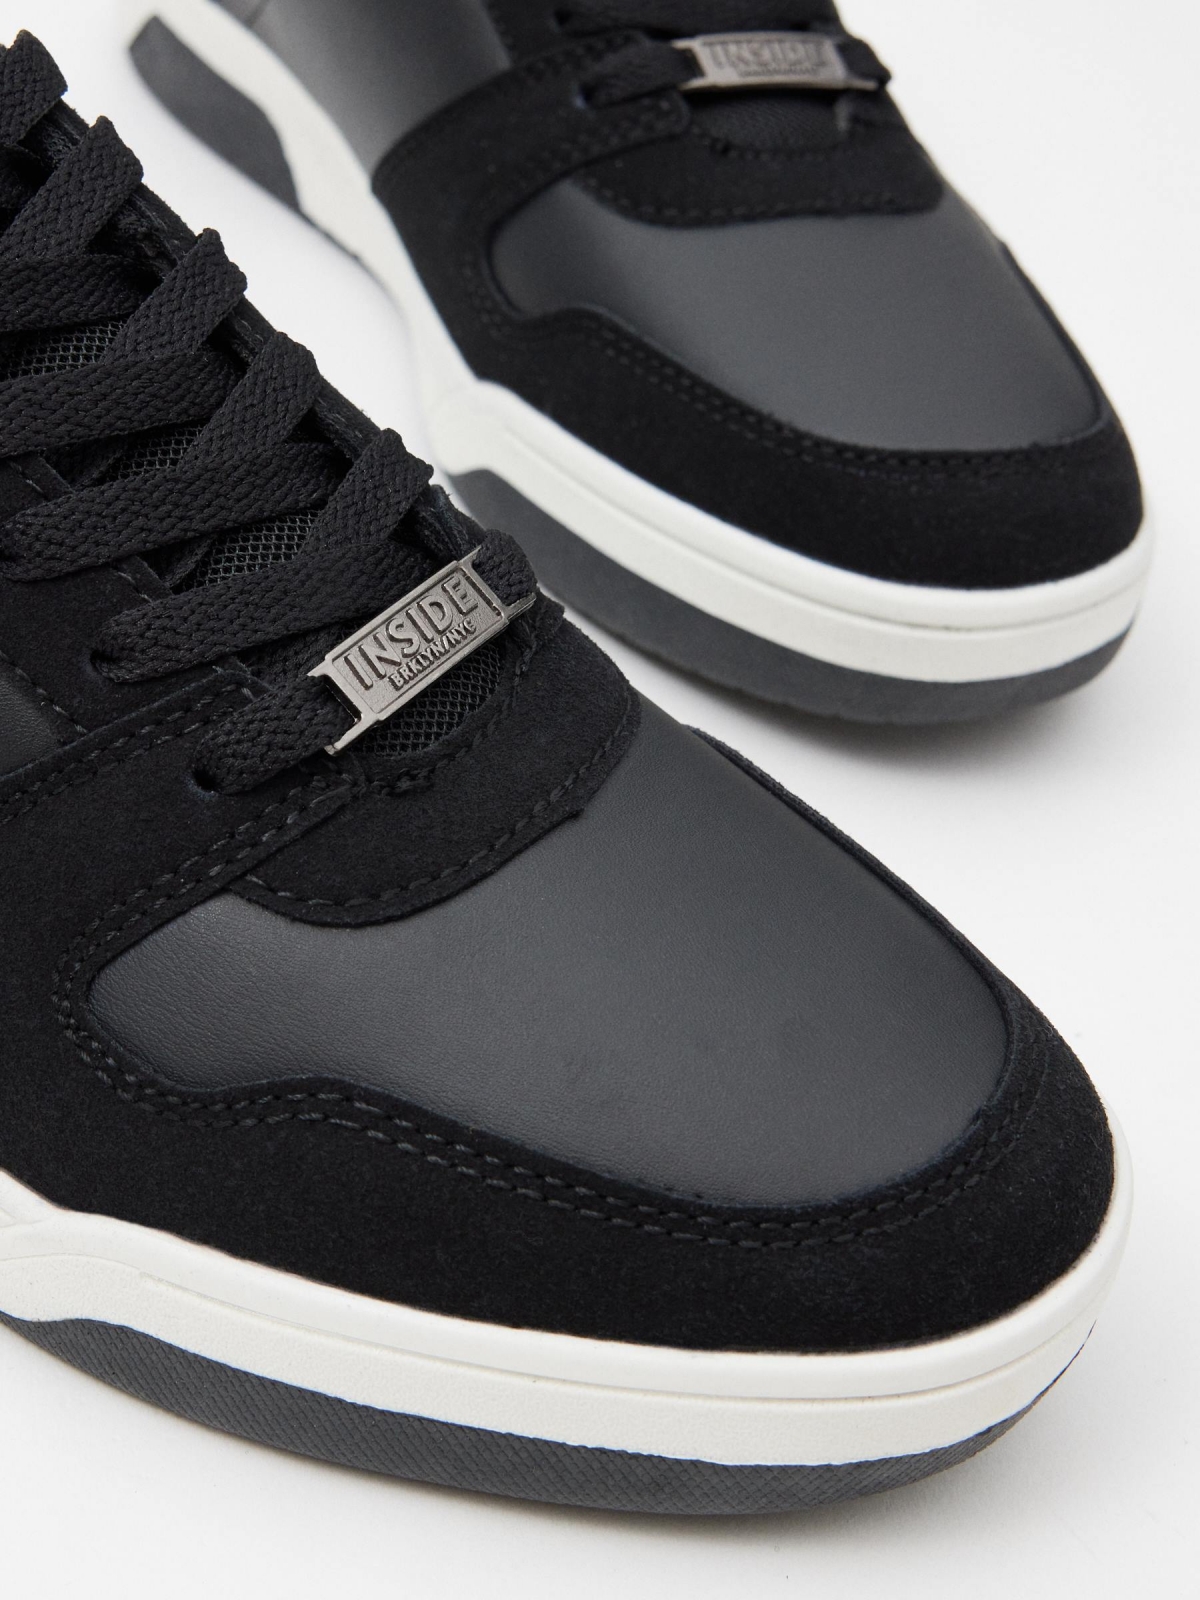 Skater and patent leather sneaker black detail view